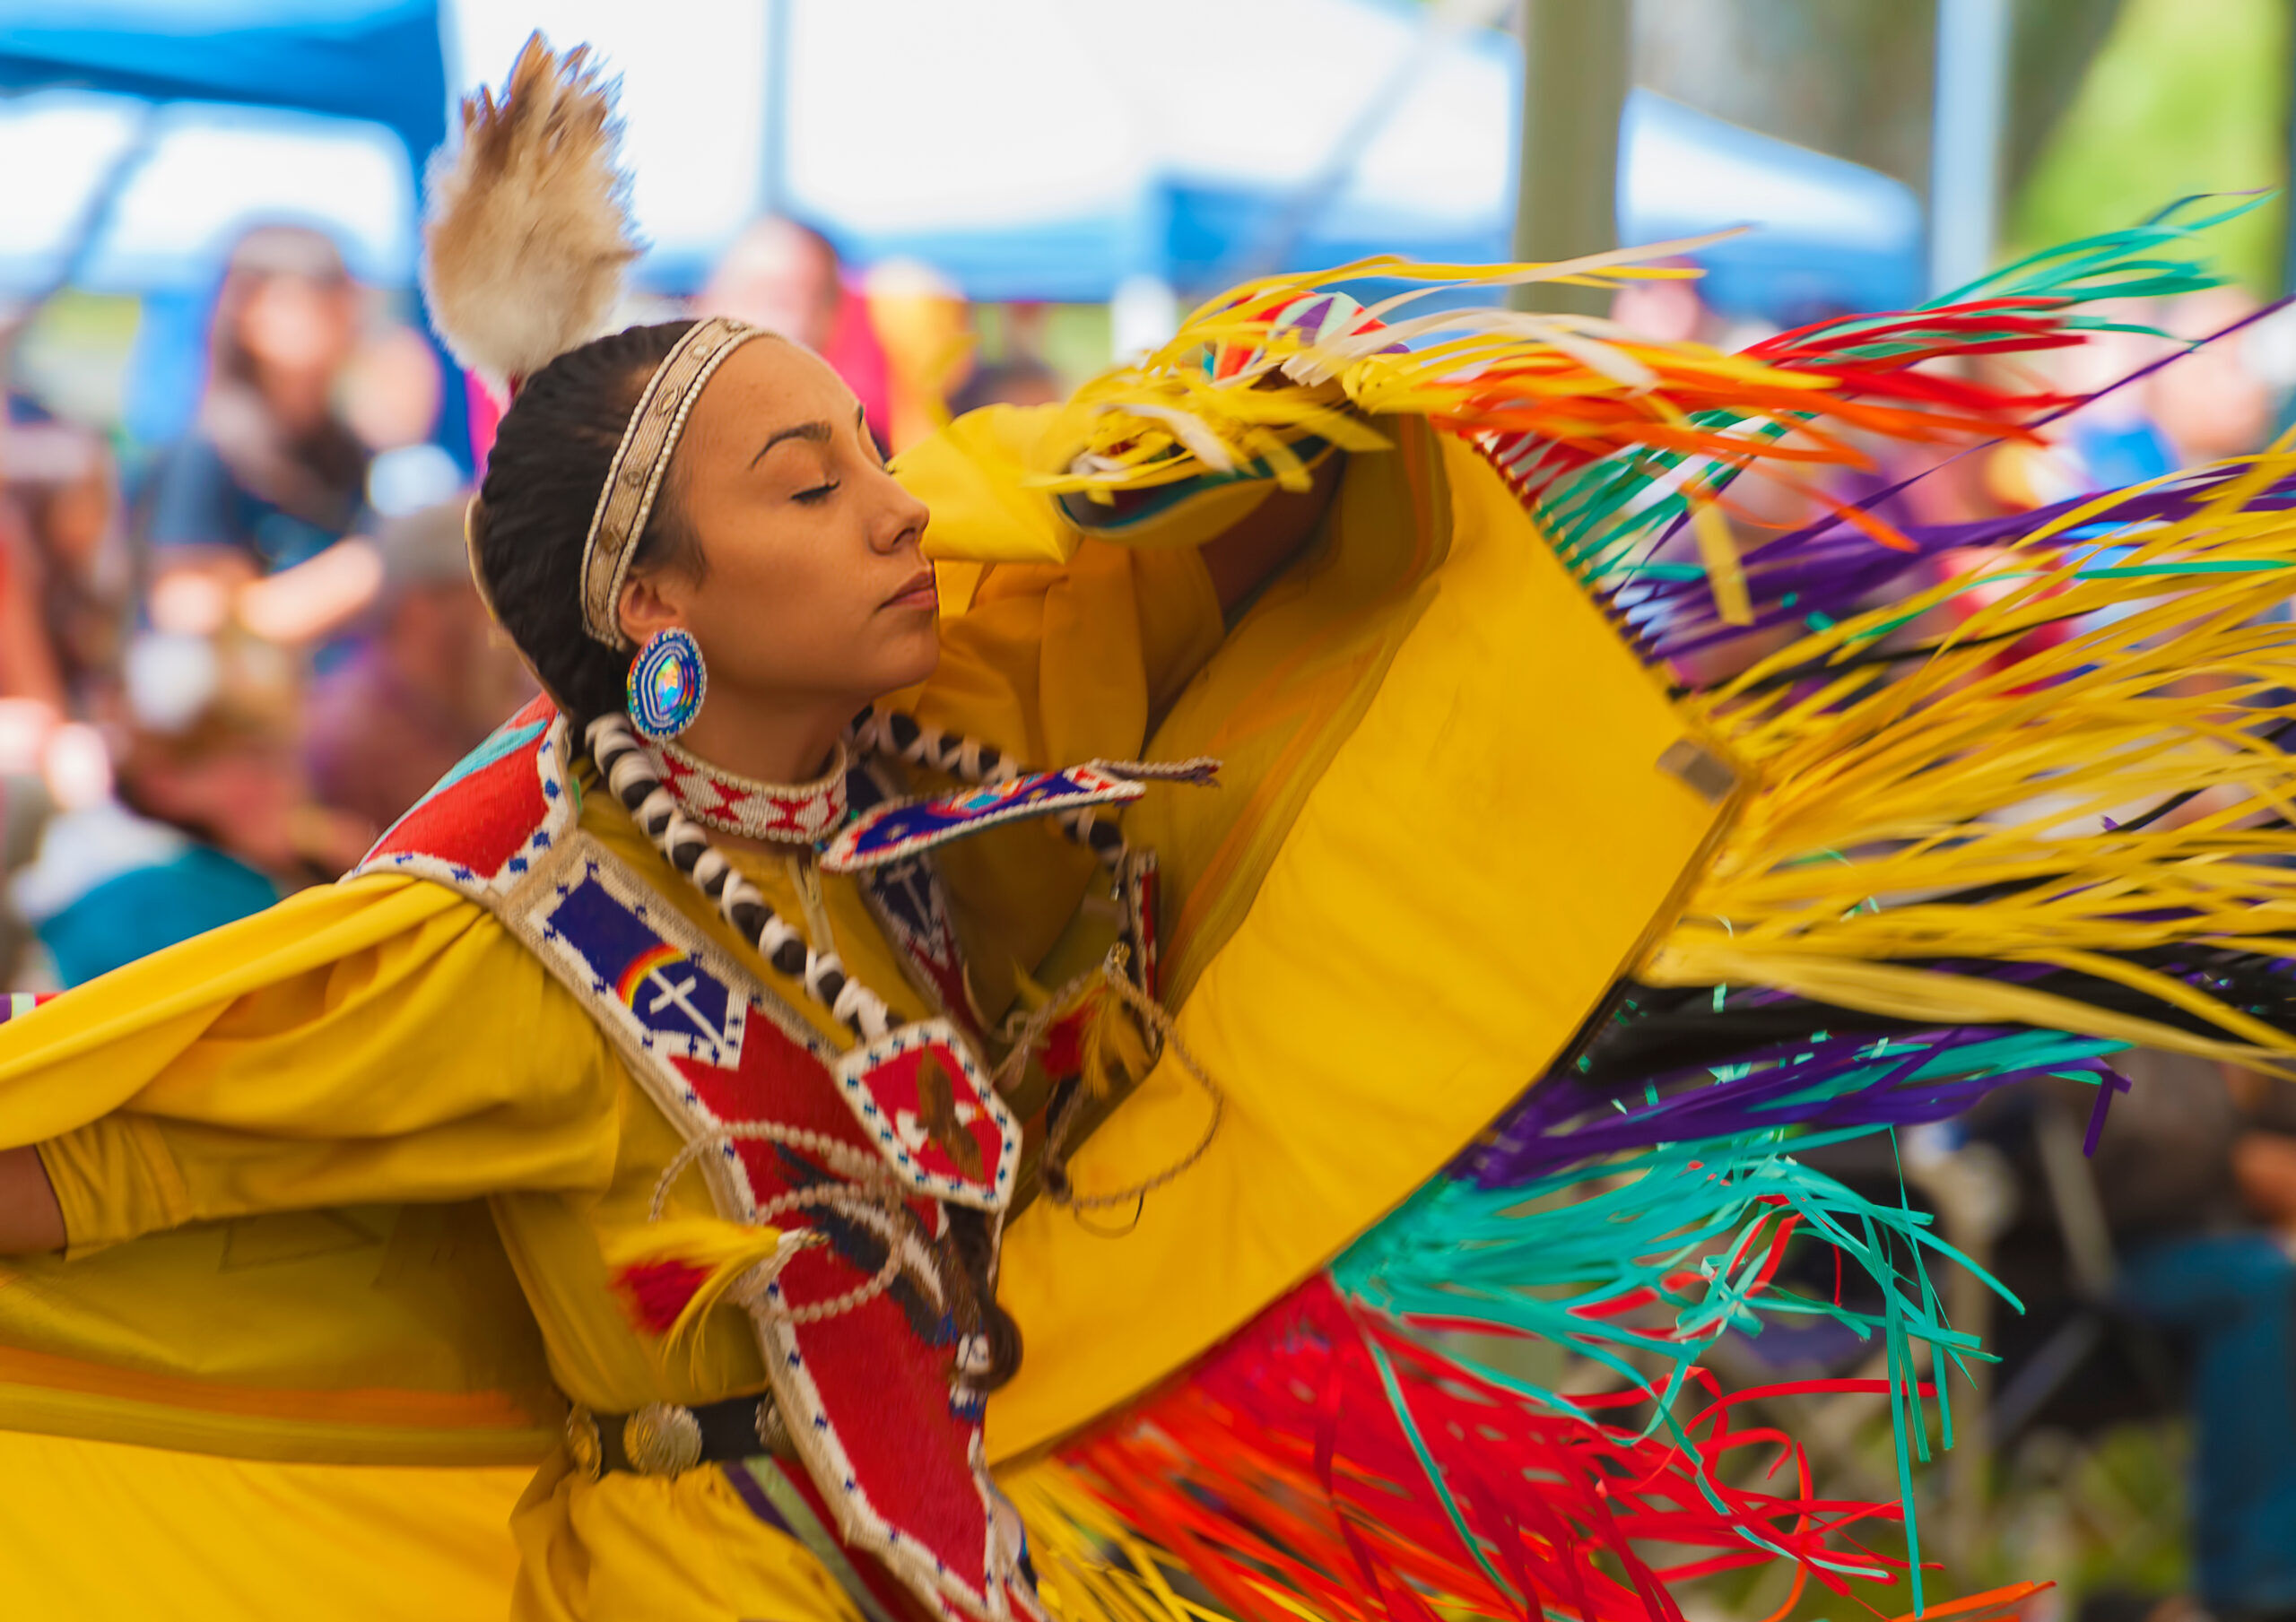 A closeup of a dancing Native American Woman, wearing beaded jewelery, and colorful clothing, while dancing with her eyes closed at the annual Delta Park Pow Wow in Portland, Oregon.